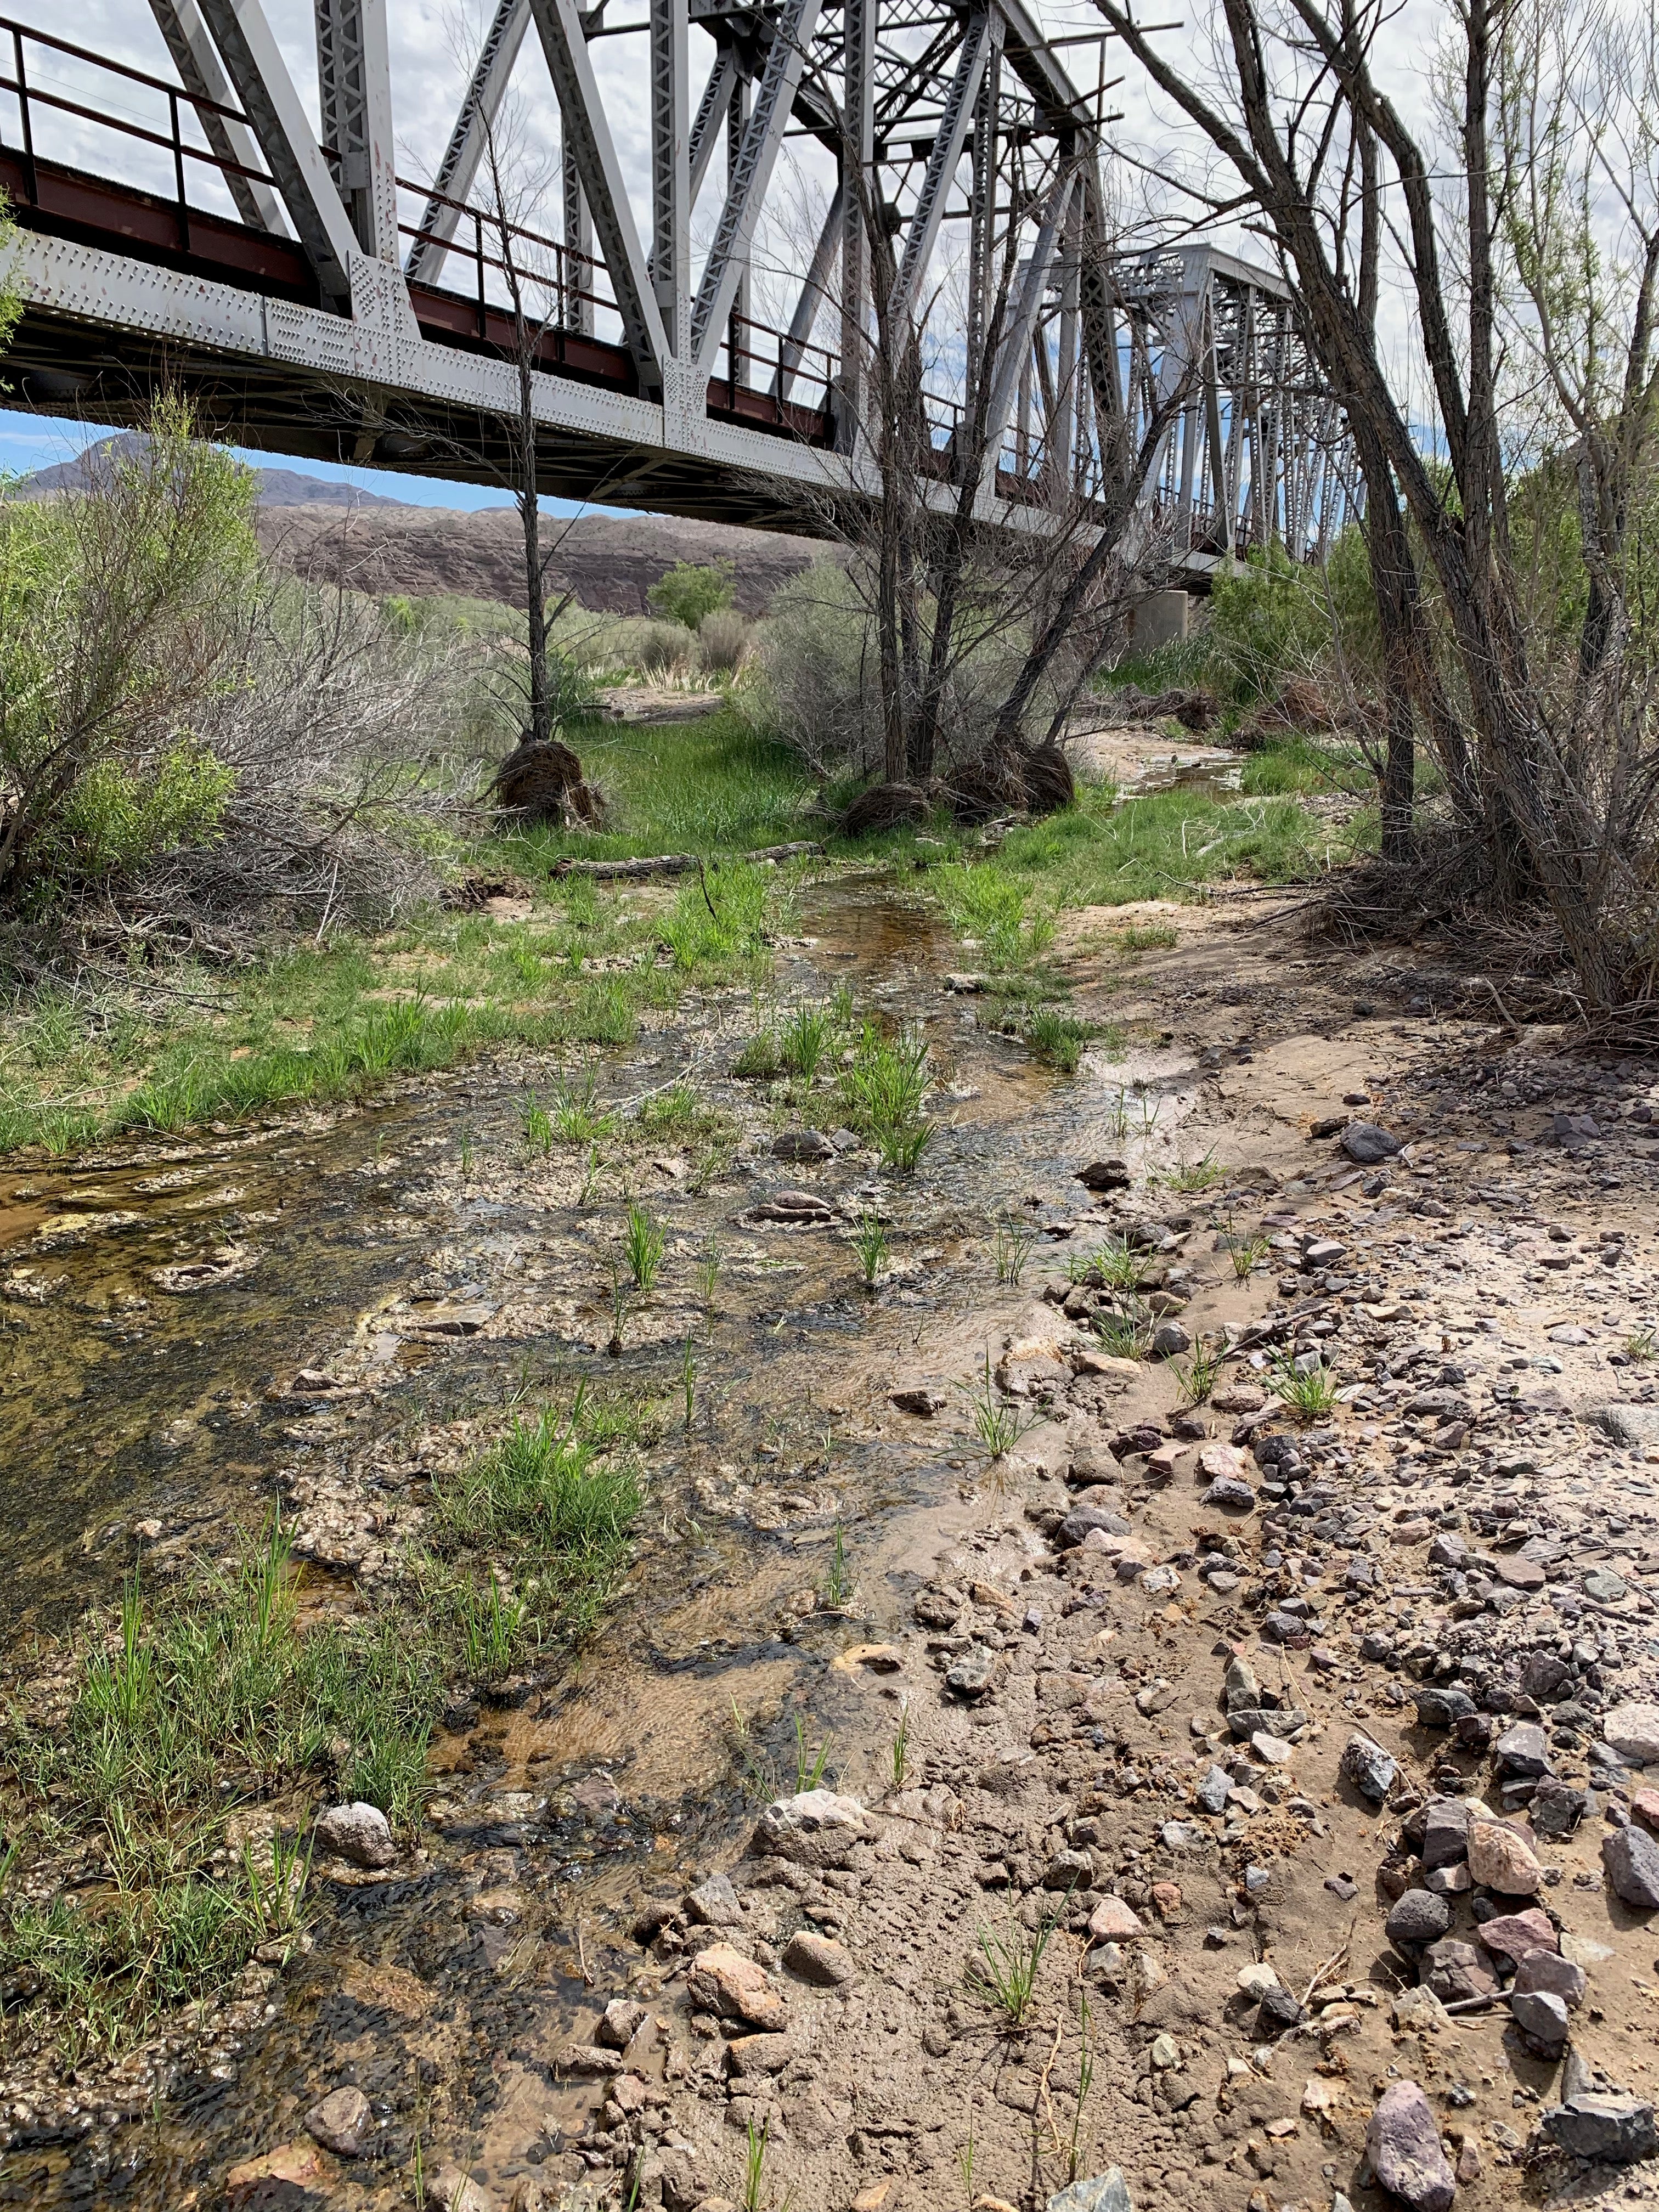 Mojave River and the nearby train tracks within walking distance of campground